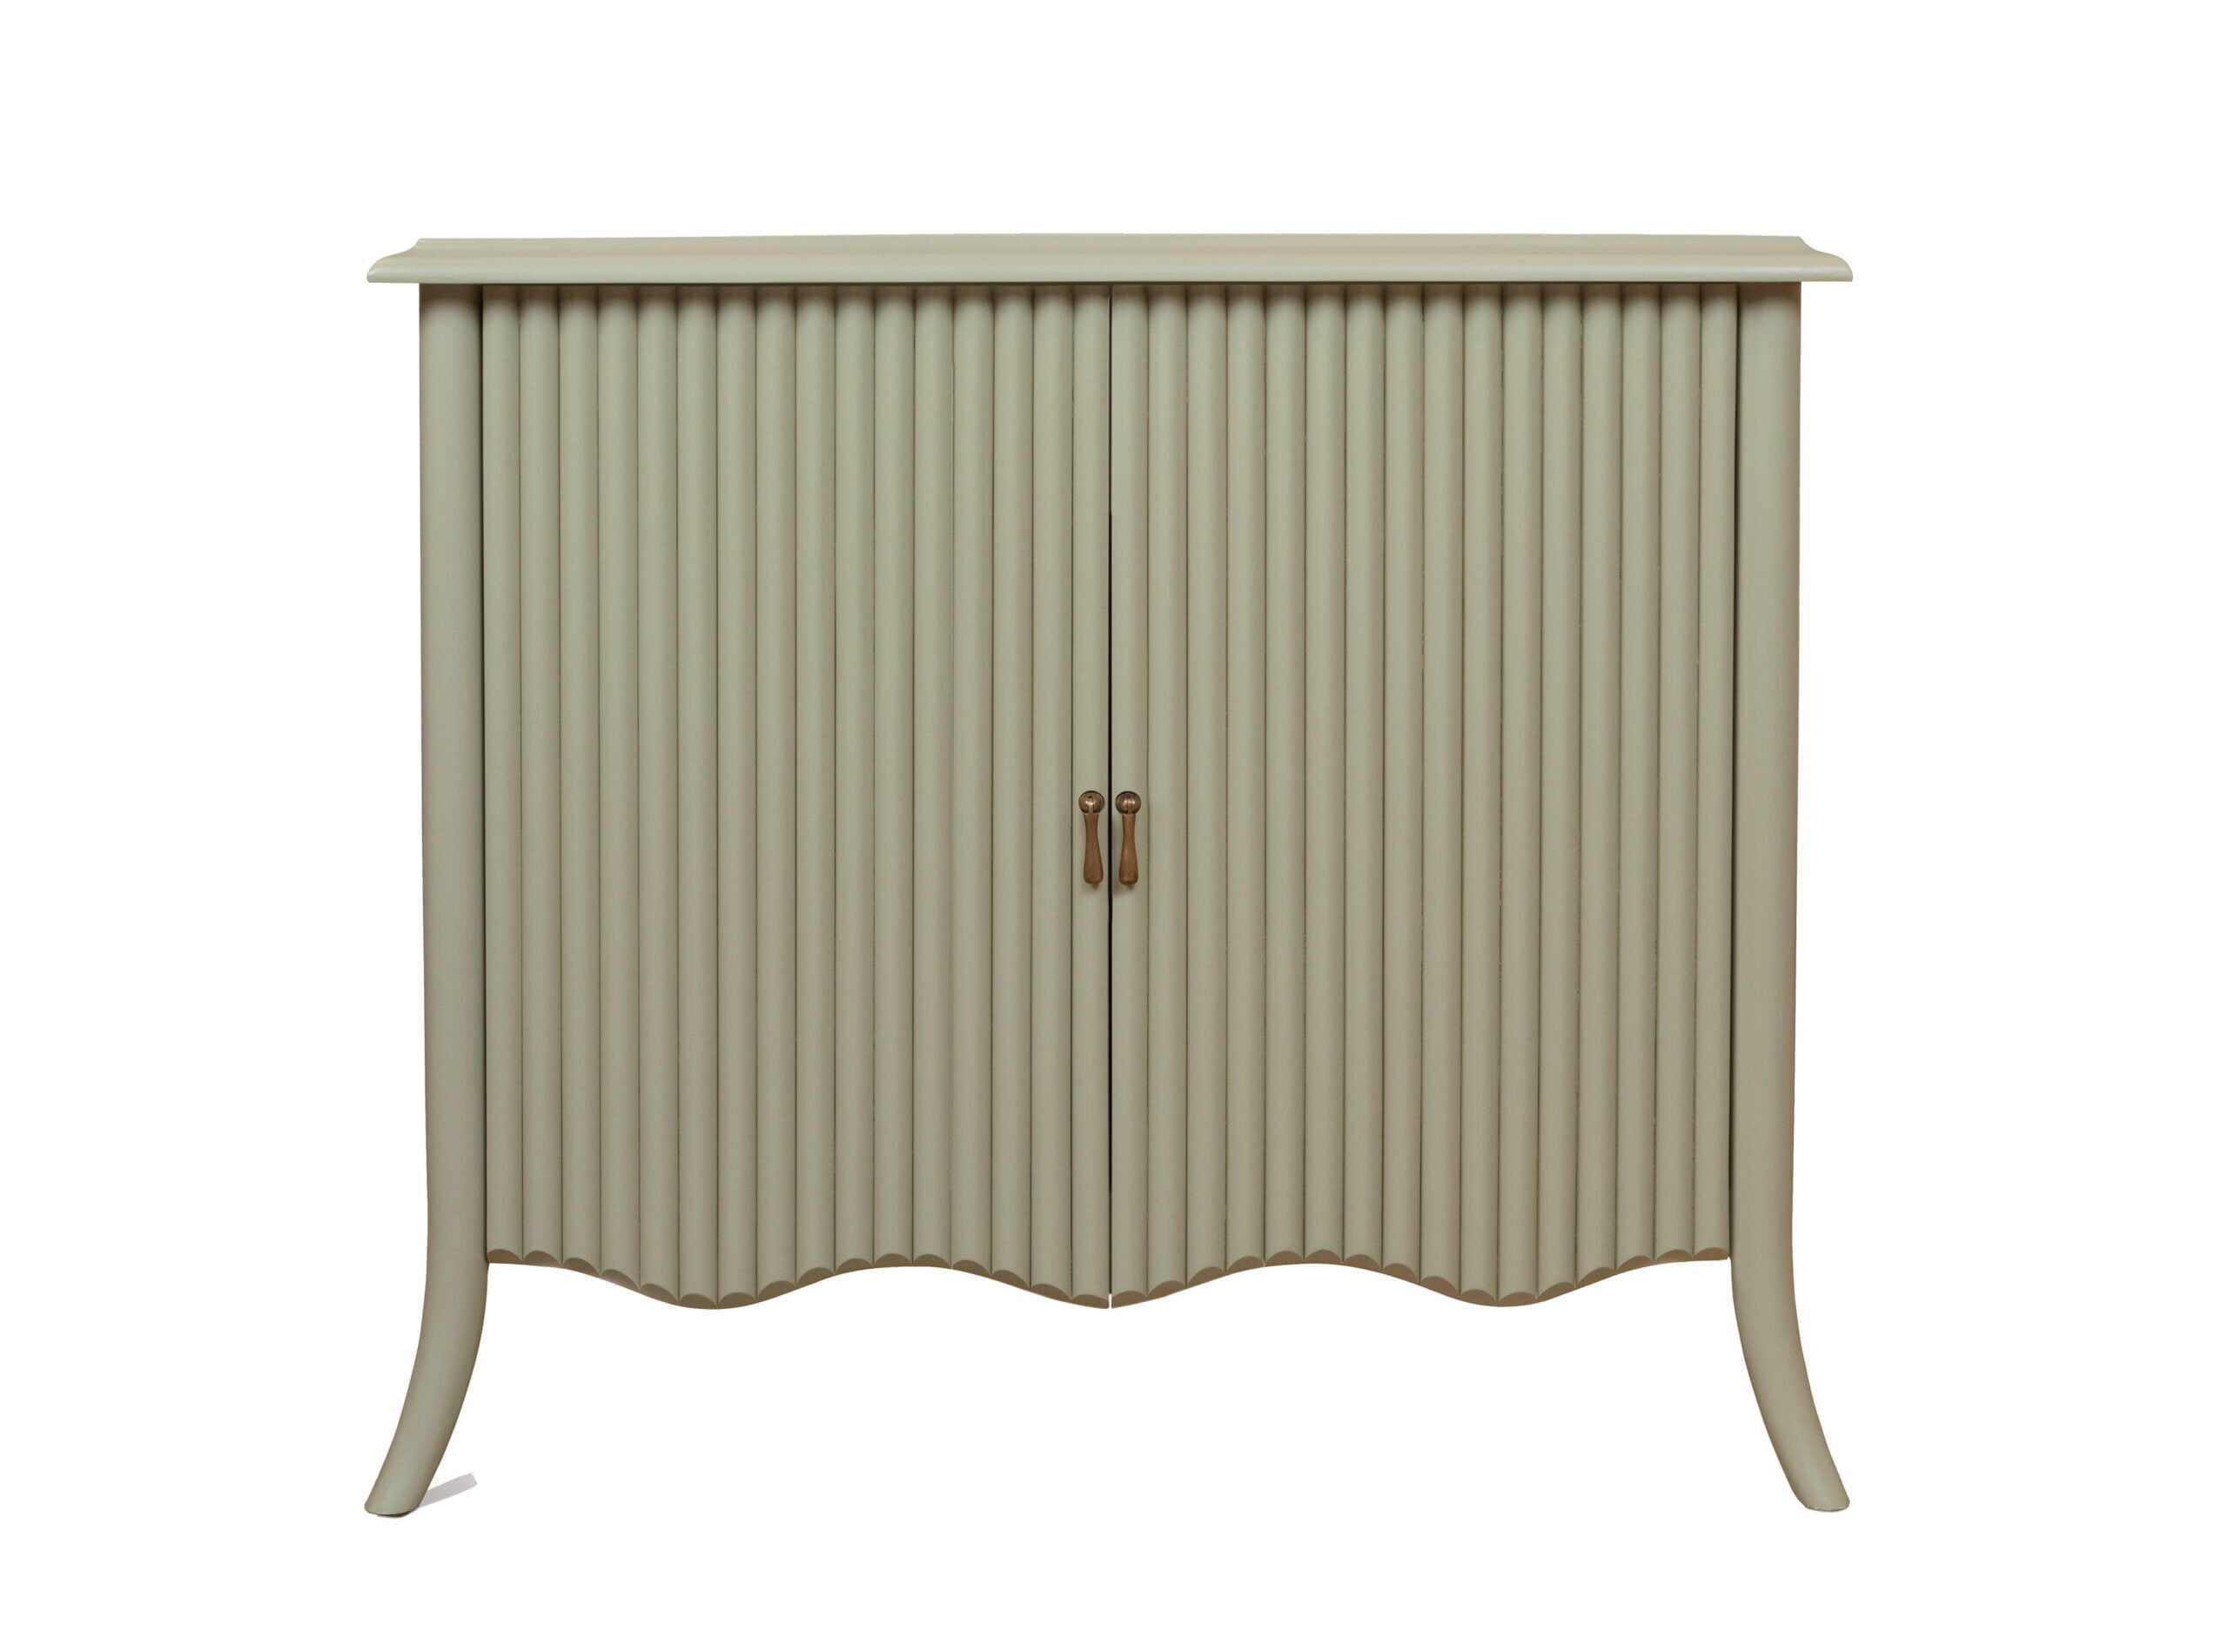 A pistachio-coloured sideboard with bamboo-style doors and a wavy bottom.